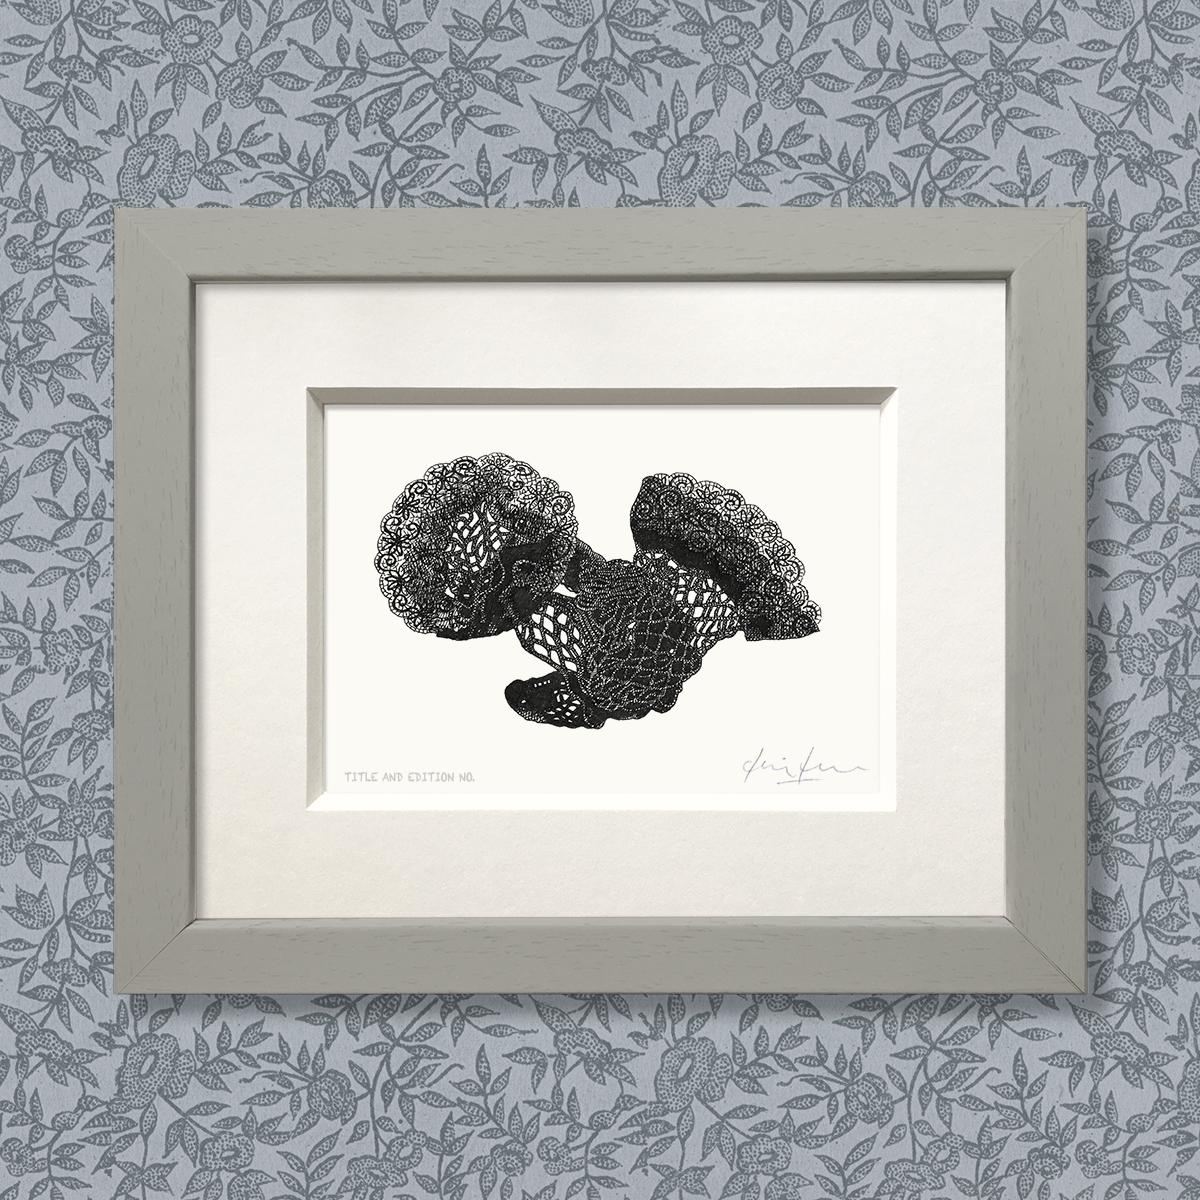 Limited edition print from pen and ink drawing of a pair of discarded fishnet stockings in a grey frame